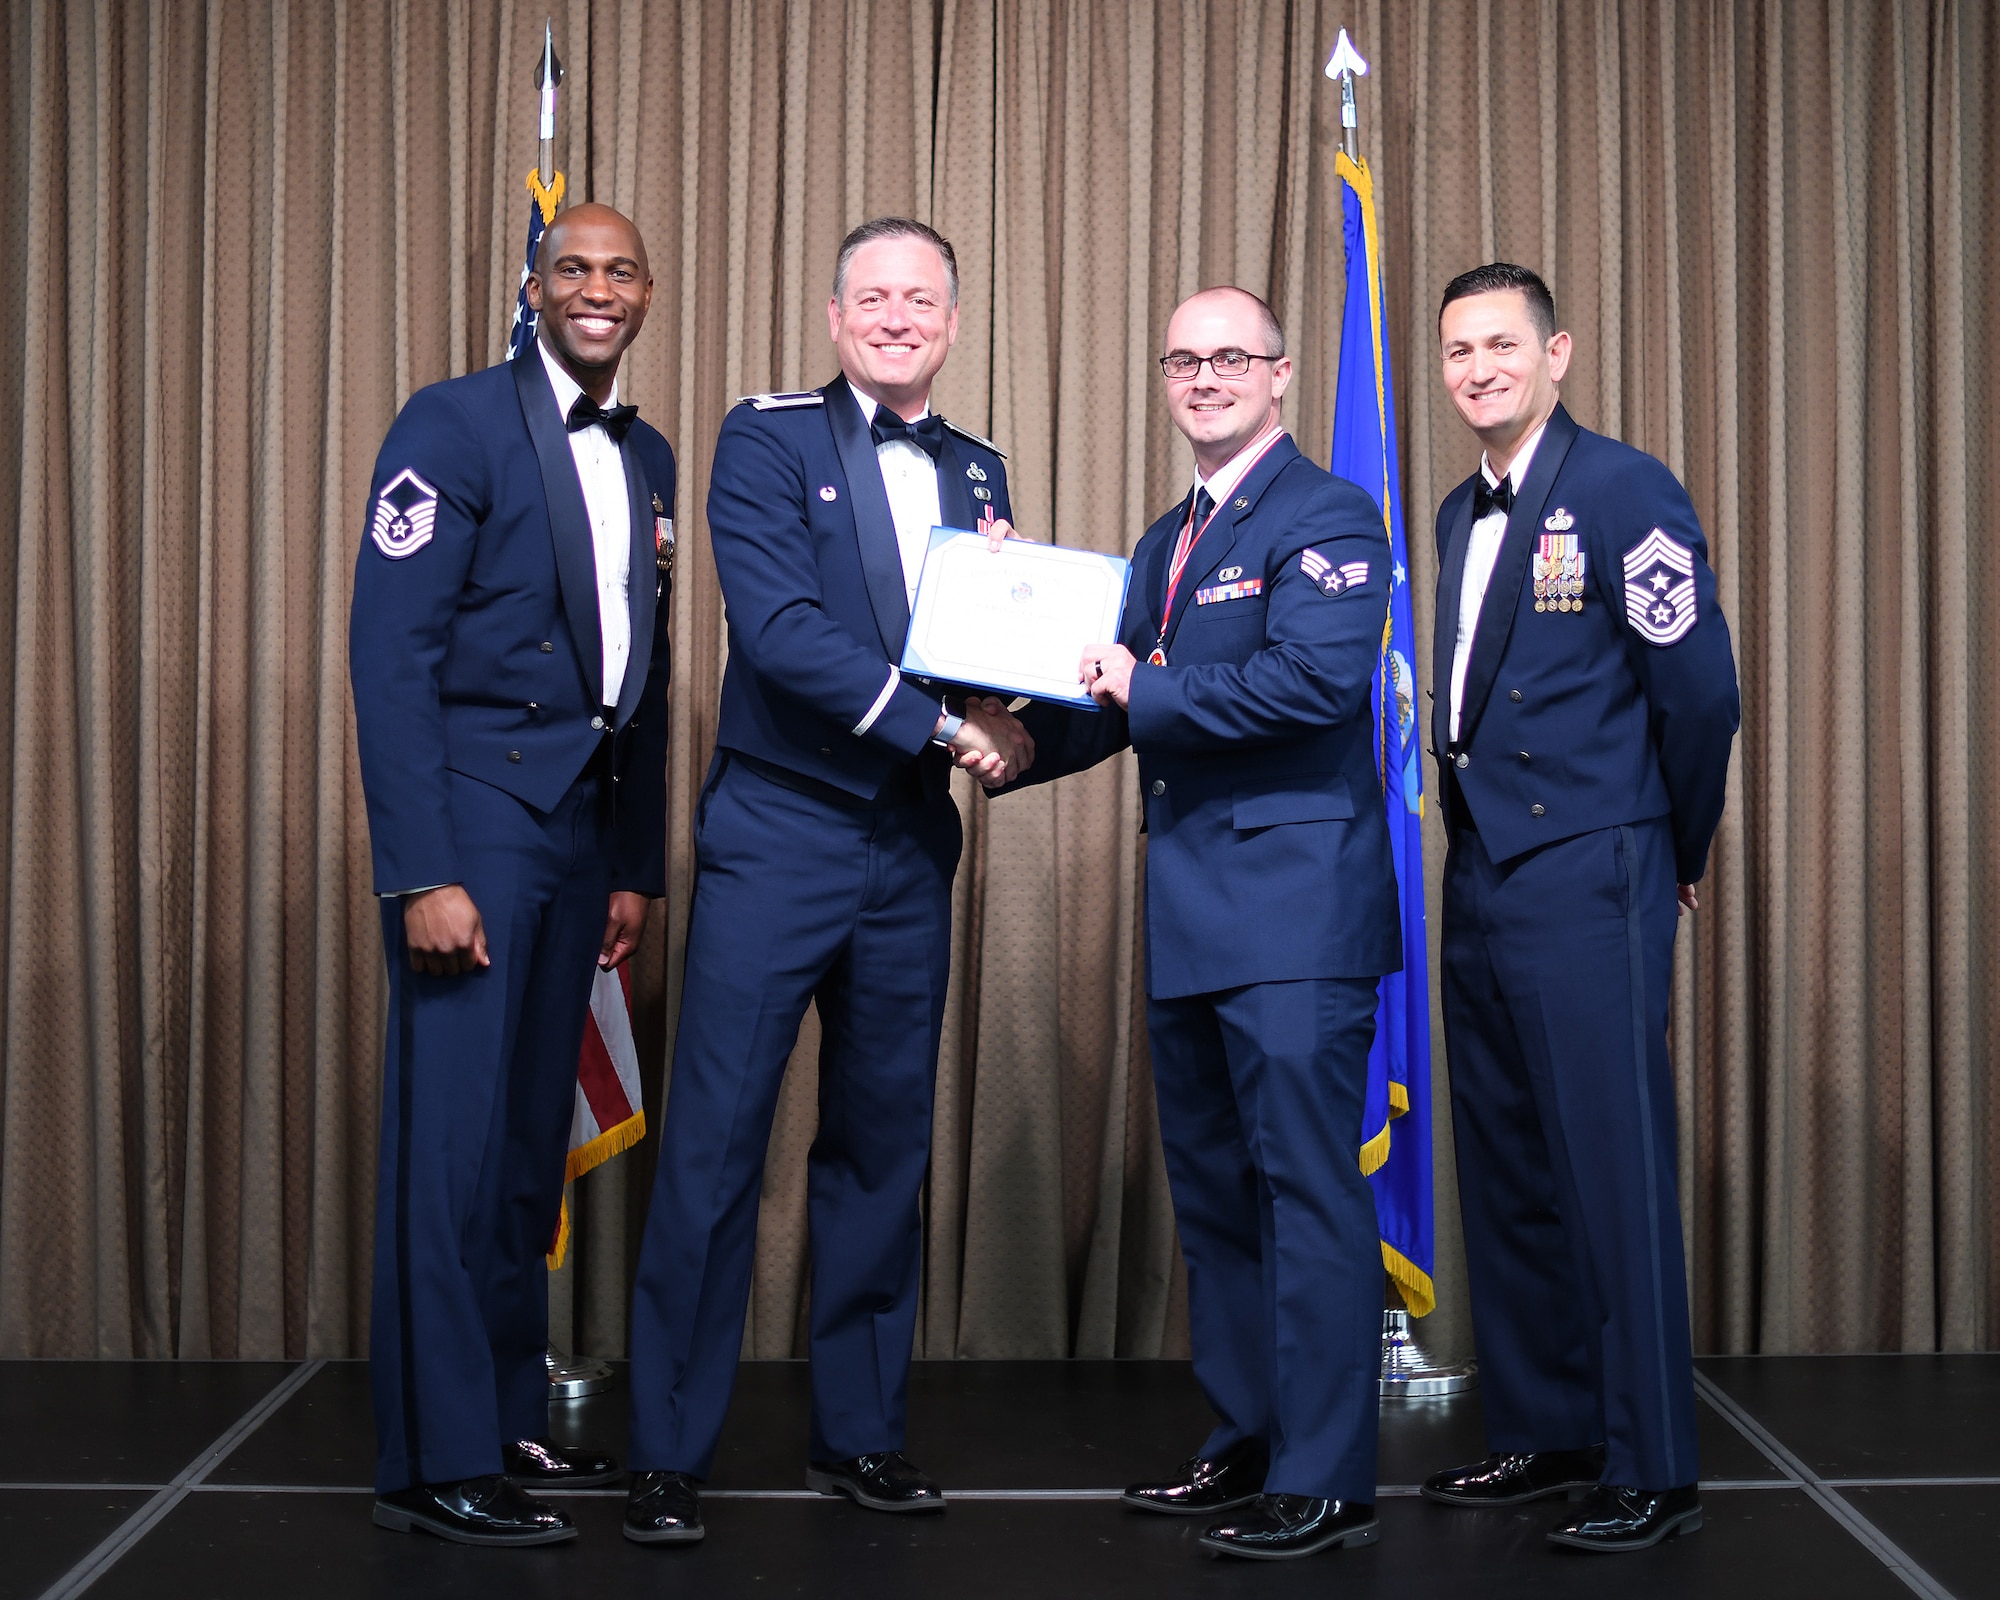 Col. Benjamin Spencer, 319th Air Base Wing commander, presents diploma to SrA Michael Coleman, Etchberger Airman Leadership School graduate, June 20, 2019, on Grand Forks Air Force Base, North Dakota. ALS graduation is the culmination of the first level of the Enlisted Professional Military Education continuum directed toward preparing upcoming noncommissioned officers with leadership skills for their careers. (U.S. Air Force photo by Senior Airman Elijaih Tiggs)